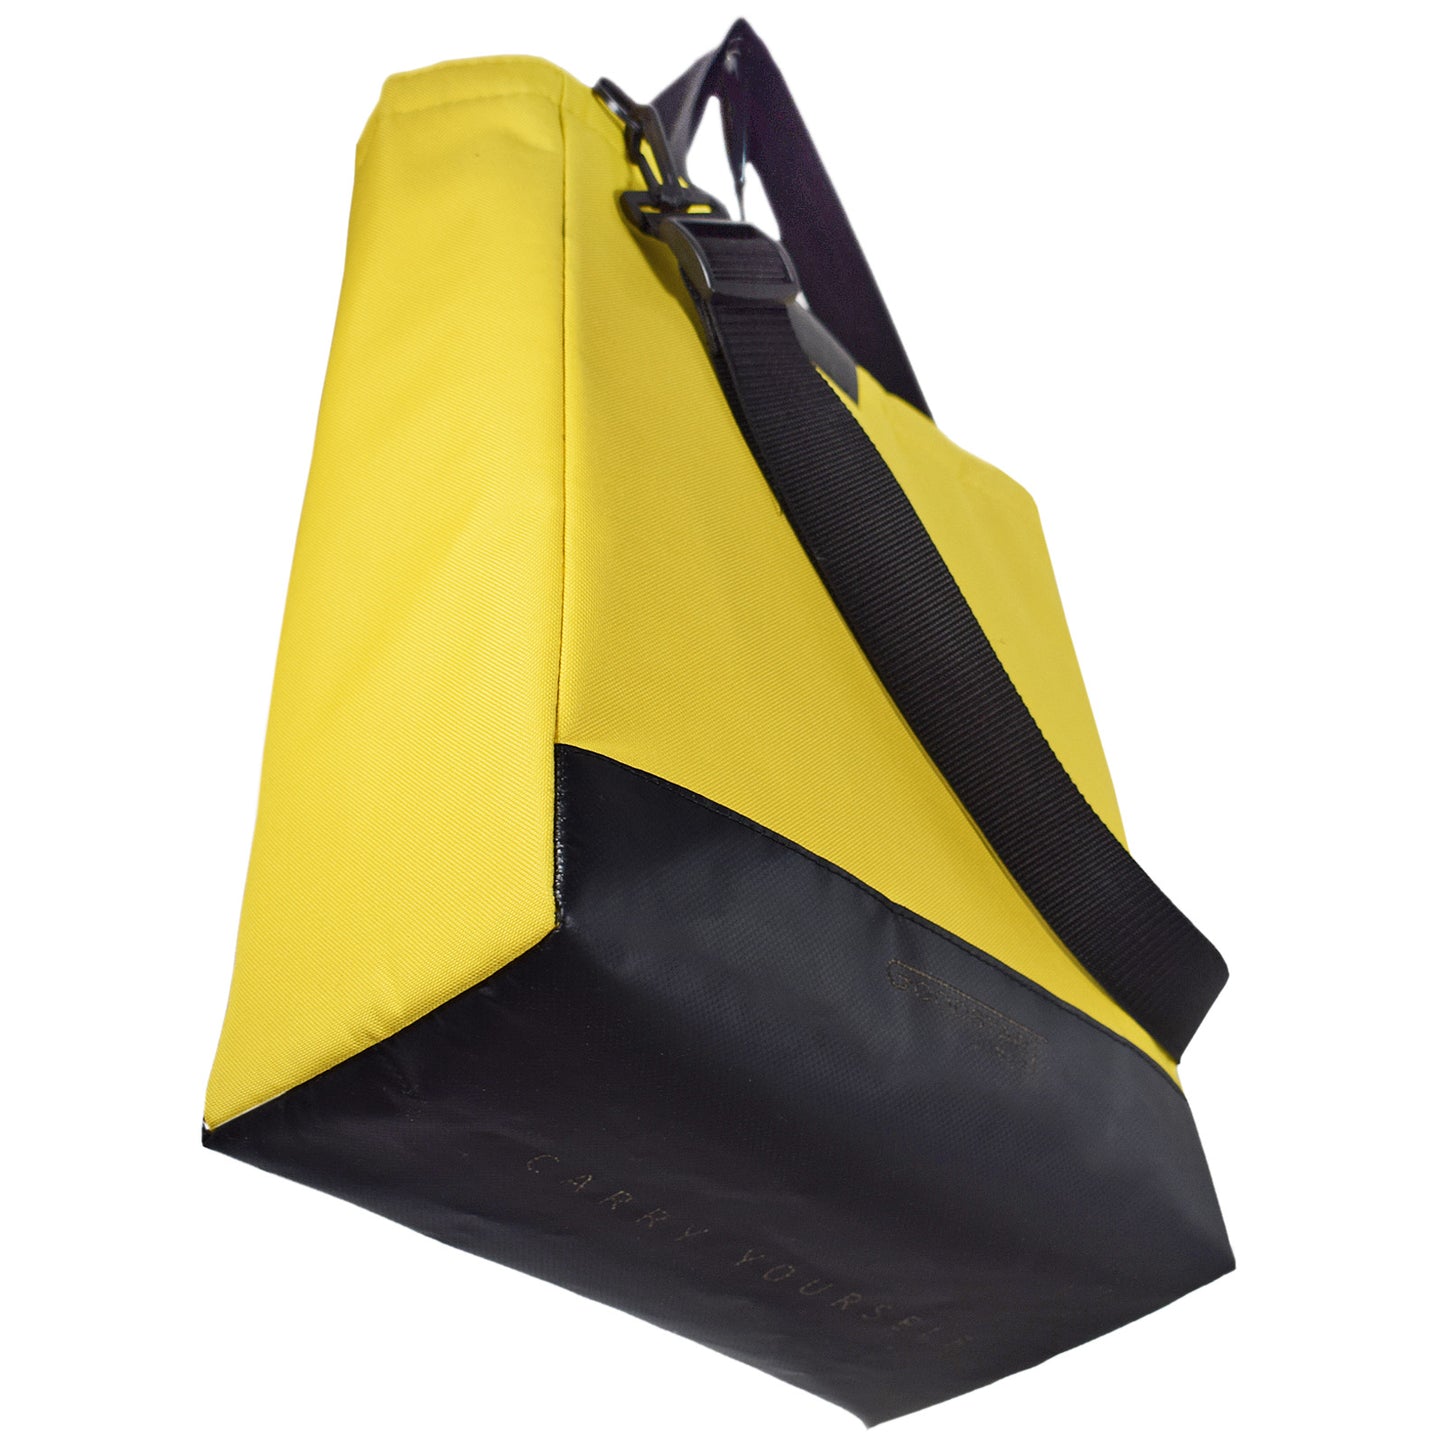 Padded Service Tote Bag | YELLOW